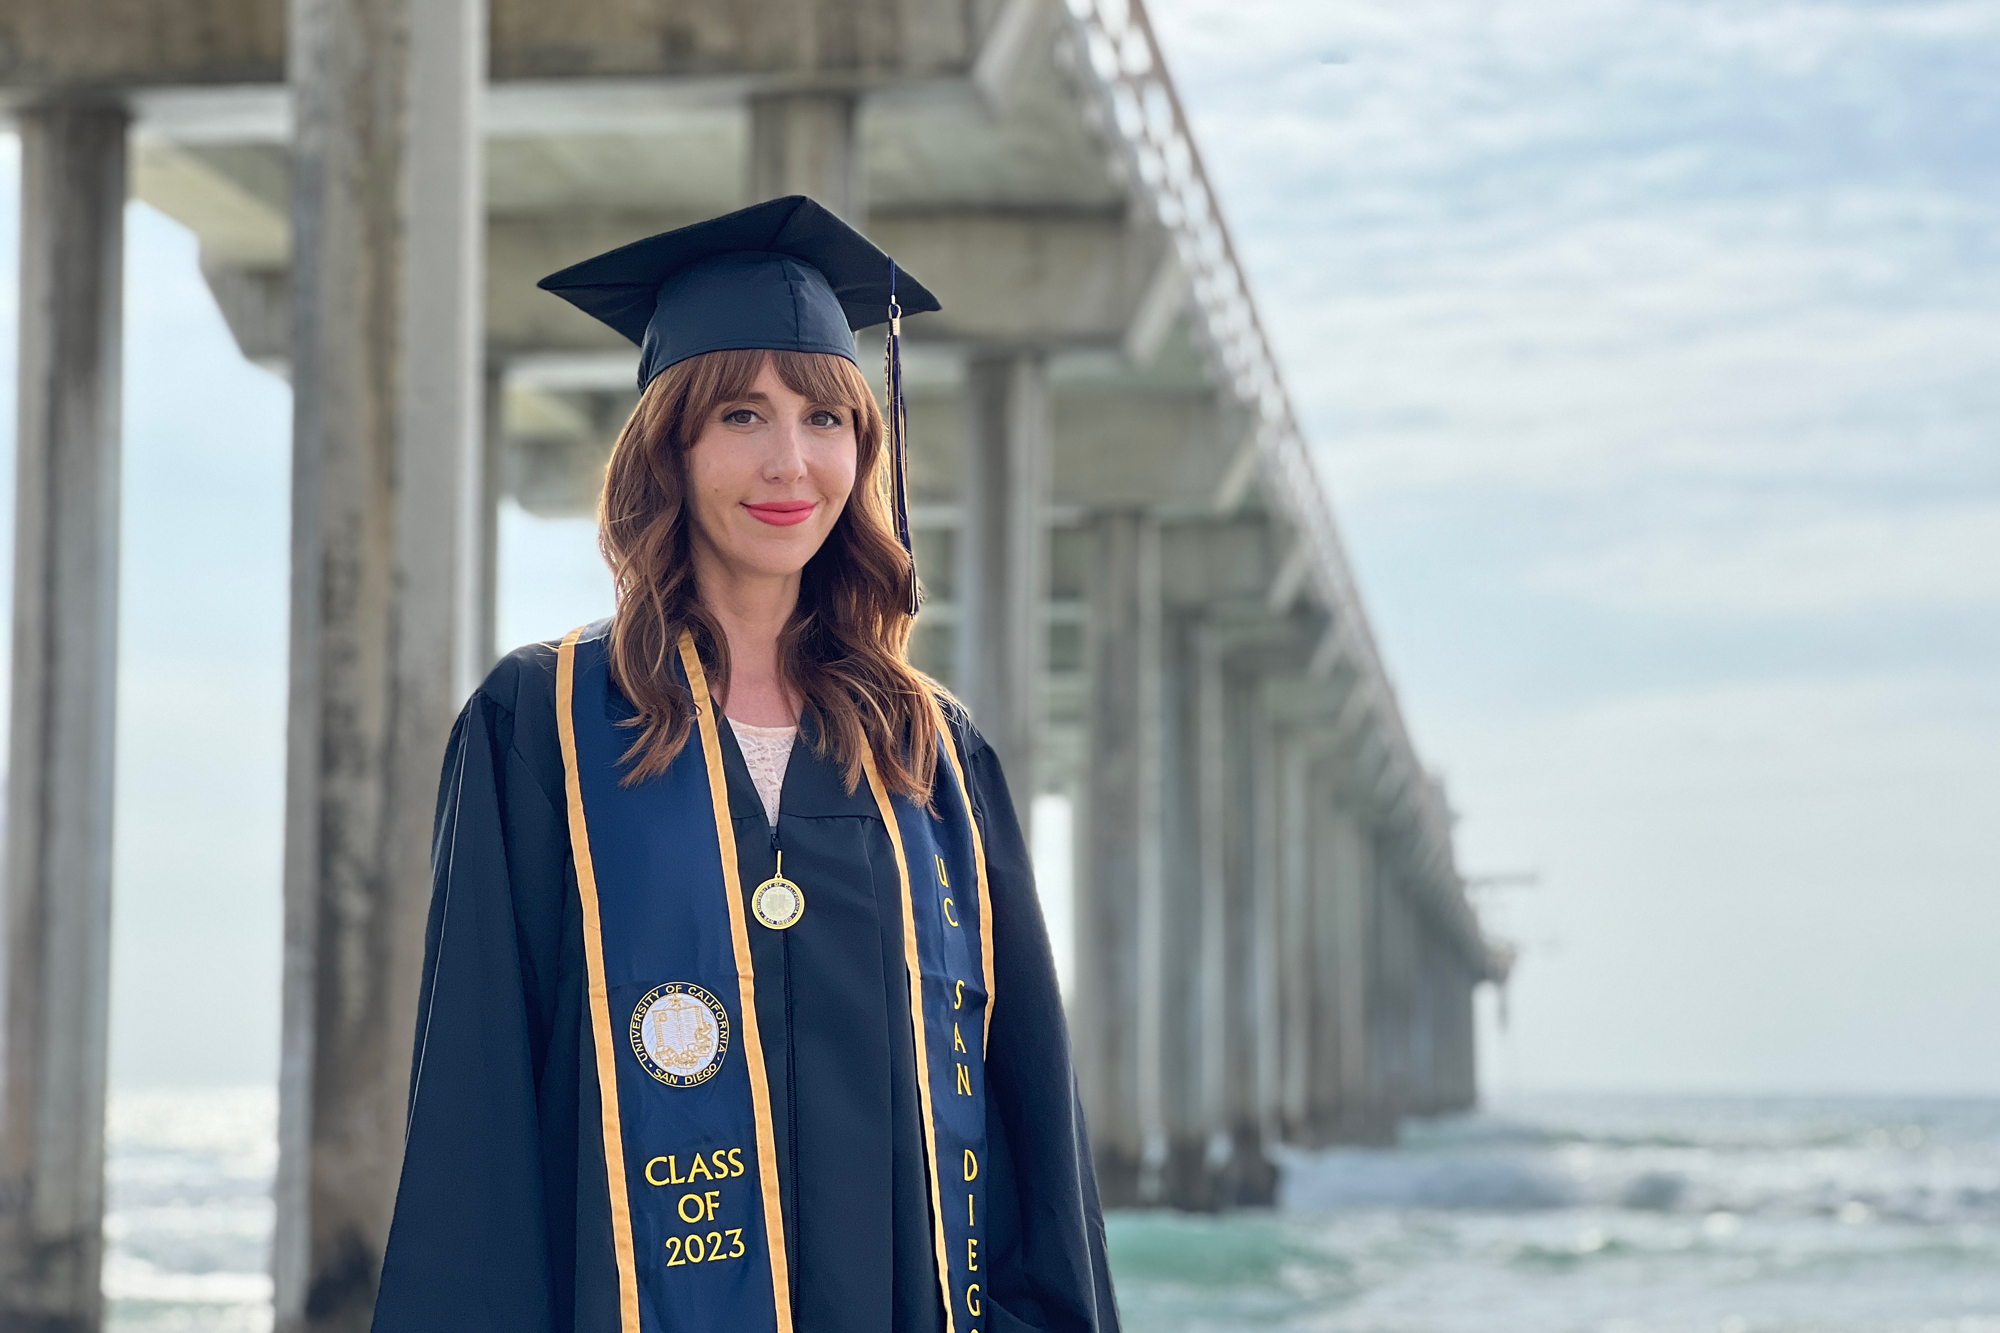 White woman in cap and gown at San Diego pier, ocean behind